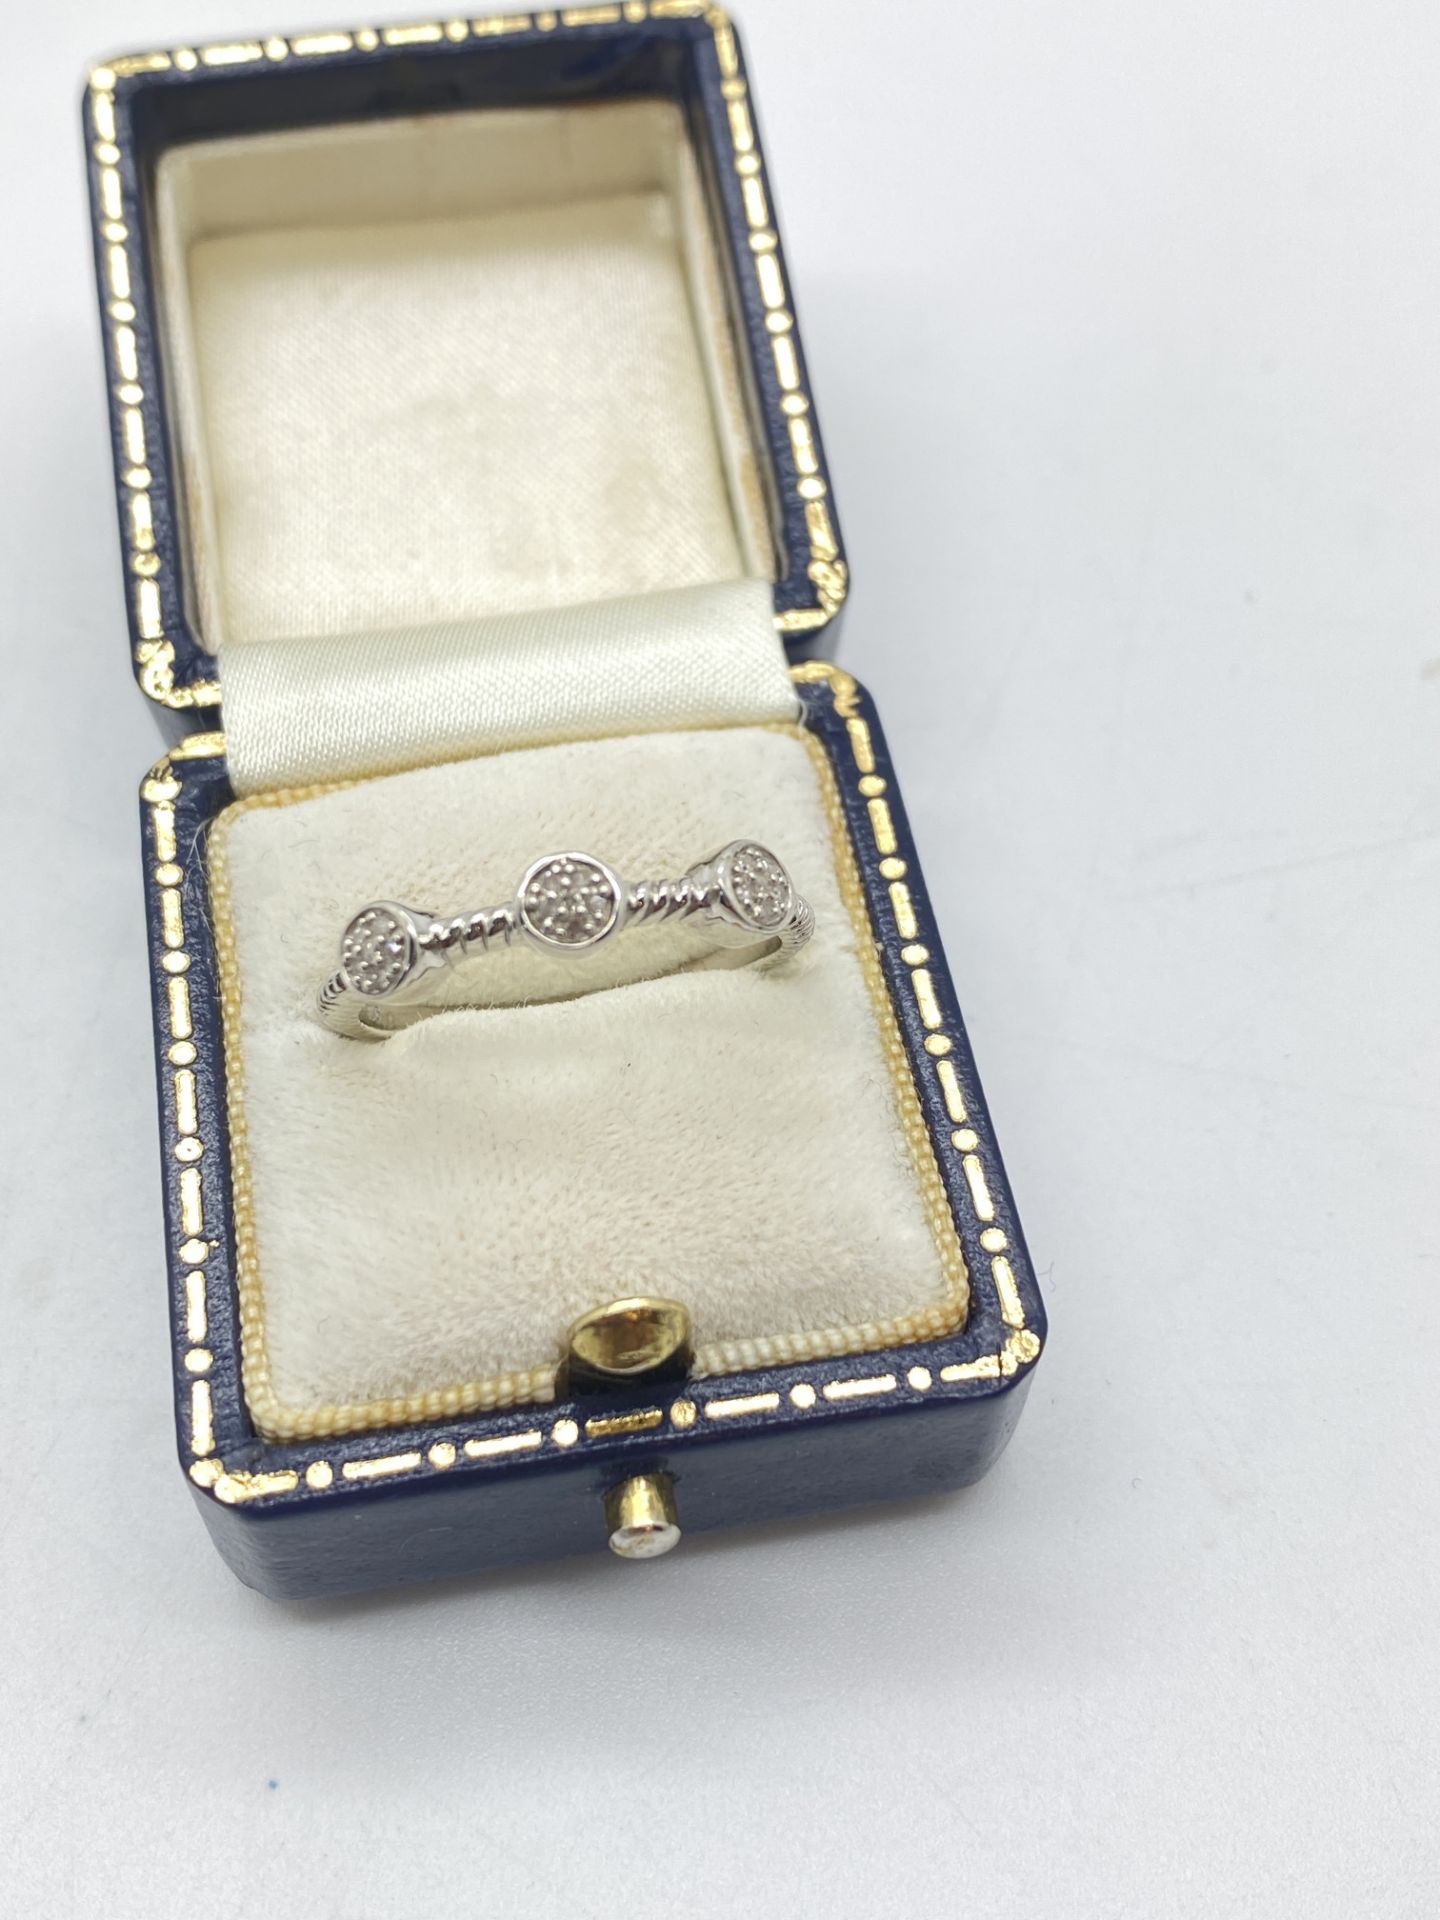 5 STONE DIAMOND RING SET IN 925 SILVER APPROX RING SIZE R